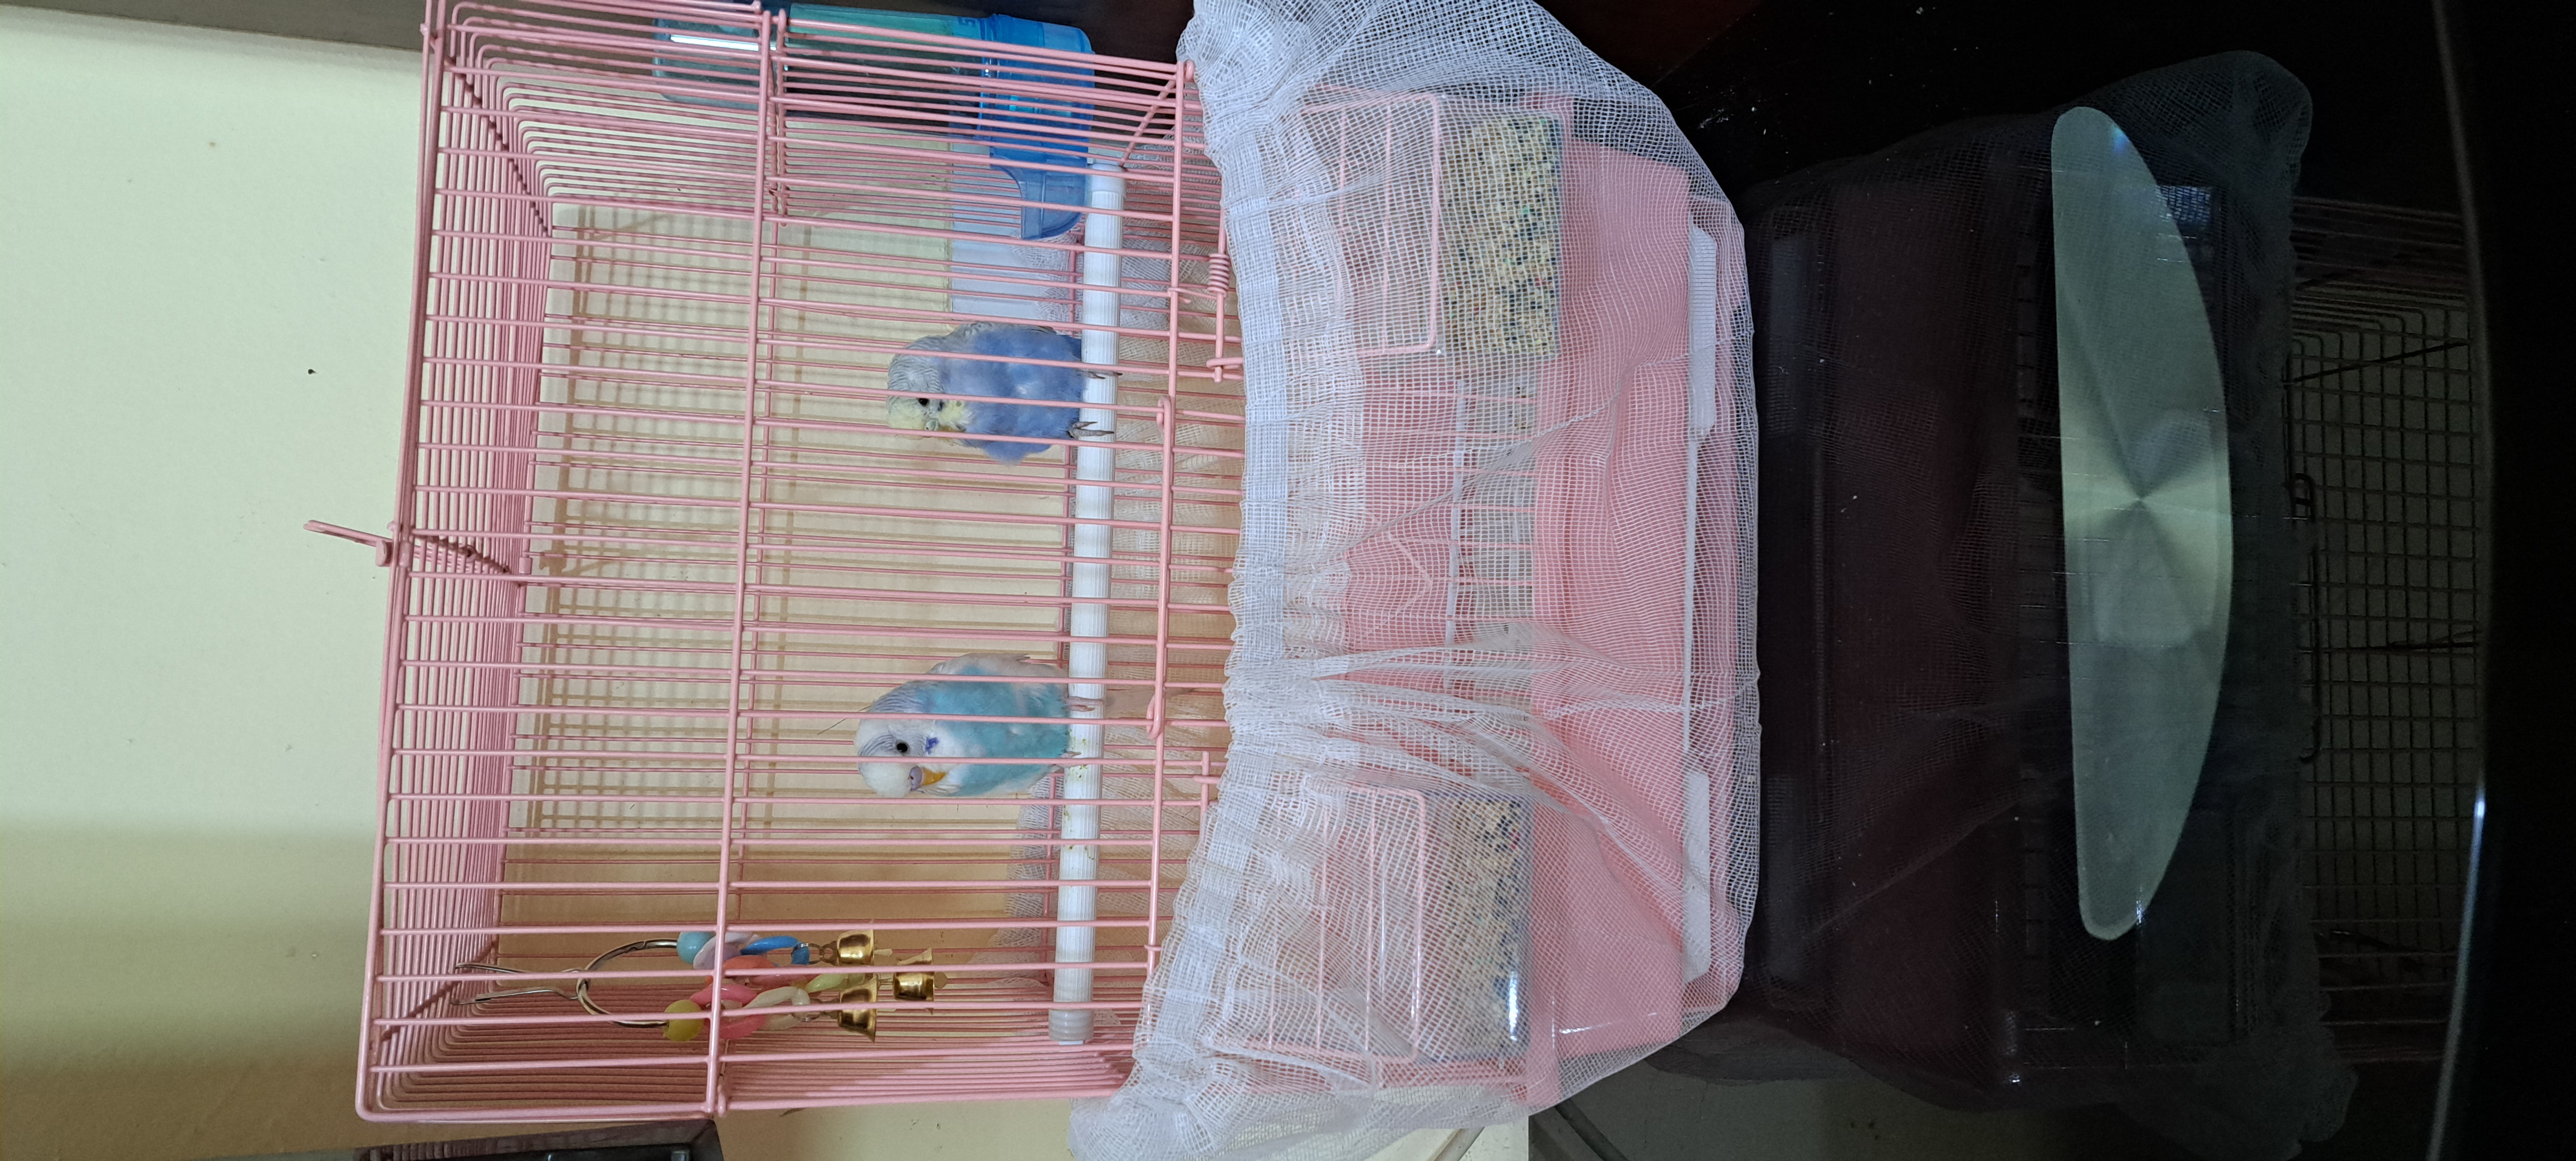 2LOVE BIRD WITH CAGE @ 7. KD. CALL 60713907.